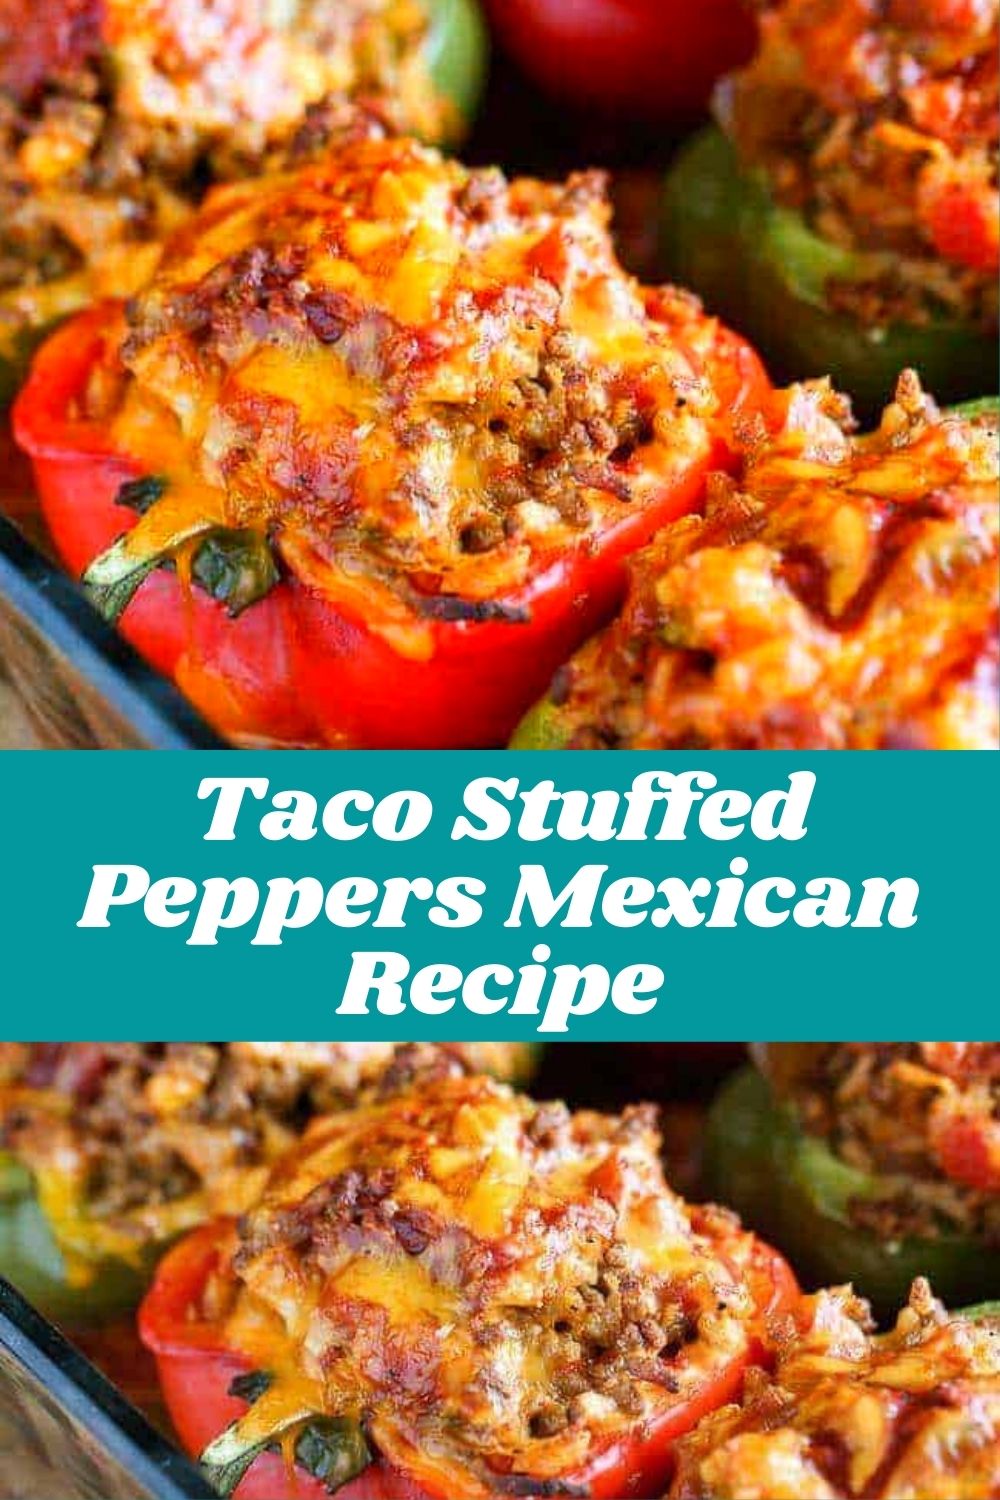 Taco Stuffed Peppers Mexican Recipe #healthyrecipe #healthysouprecipe #healthy #healthyfood #healthylifestyle